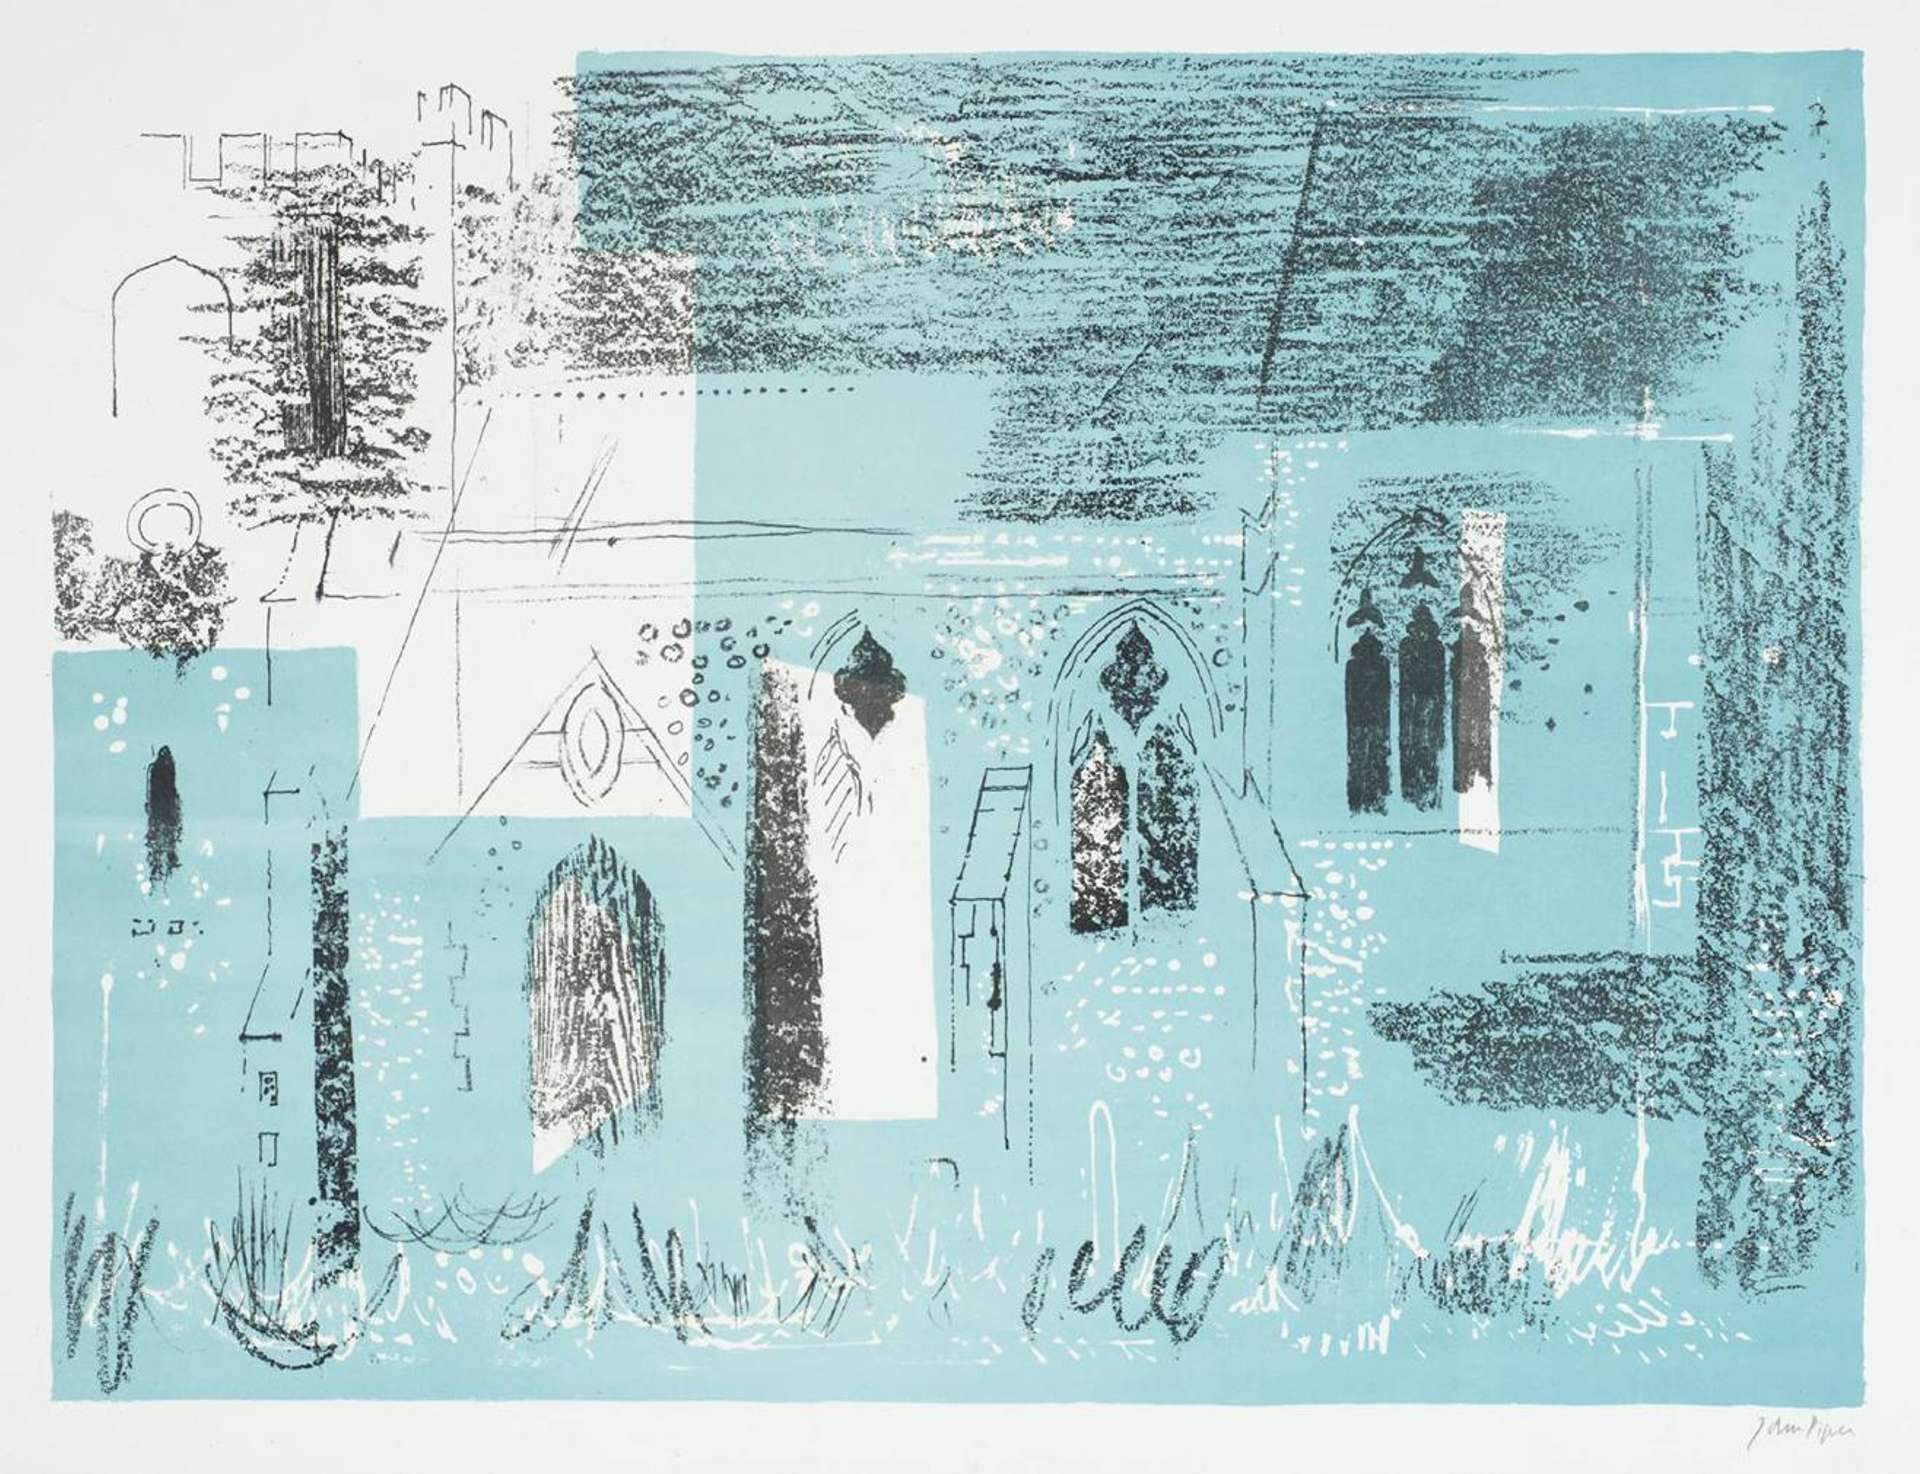 Lewknor, Oxfordshire: Textured Walls, Traceried Windows - Signed Print by John Piper 1964 - MyArtBroker